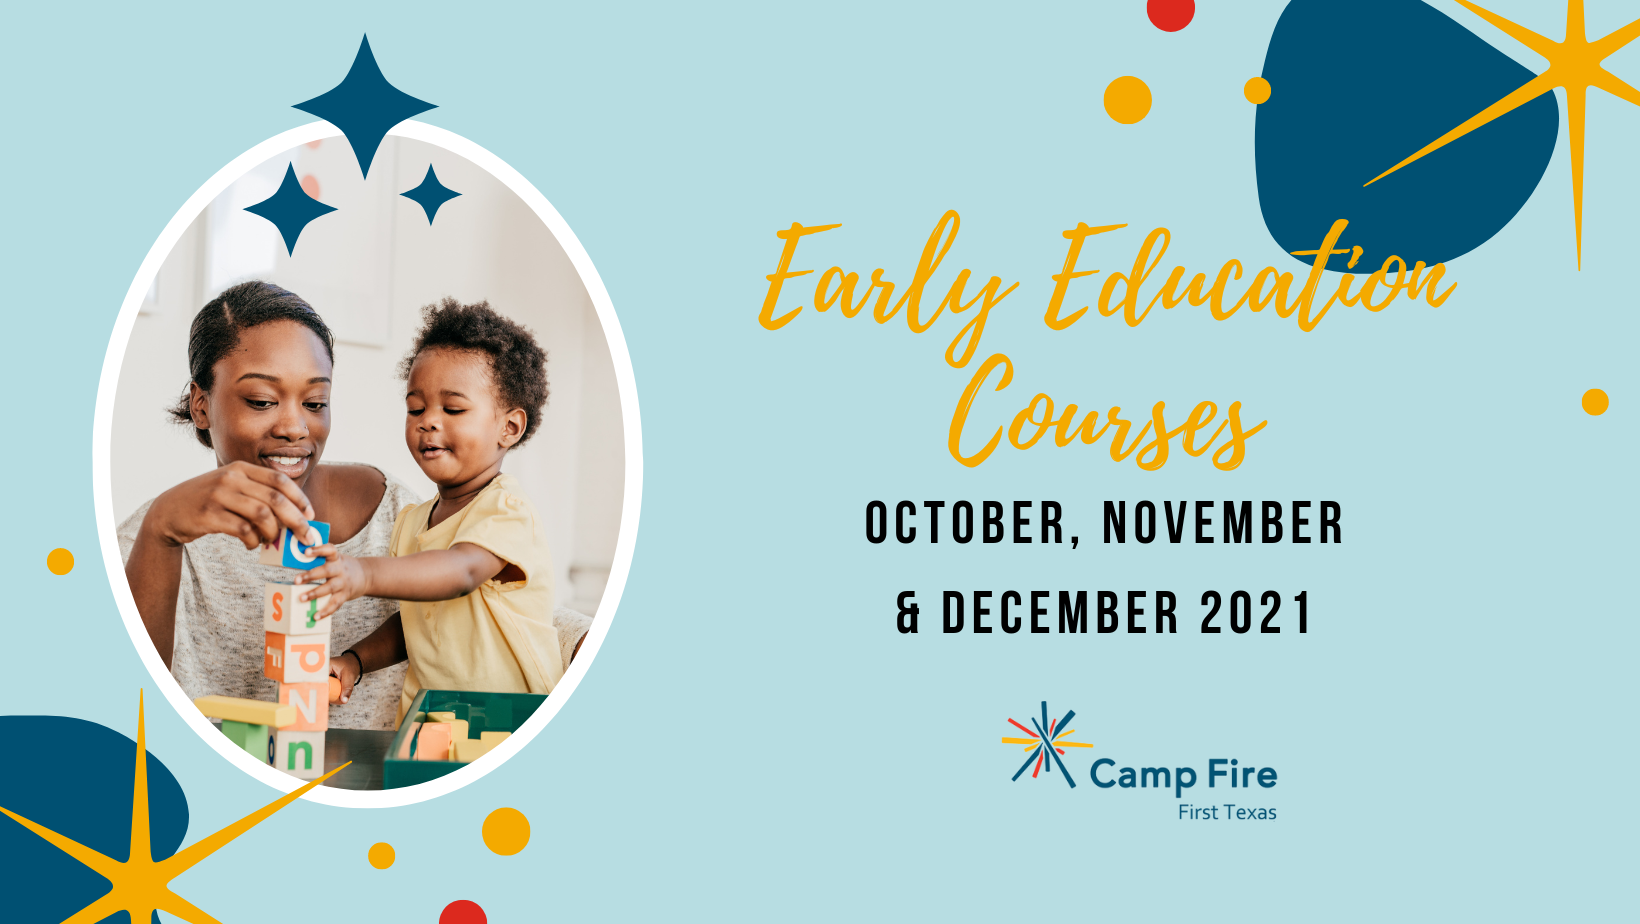 Early Education Courses: October, November & December 2021, a Camp Fire First Texas blog